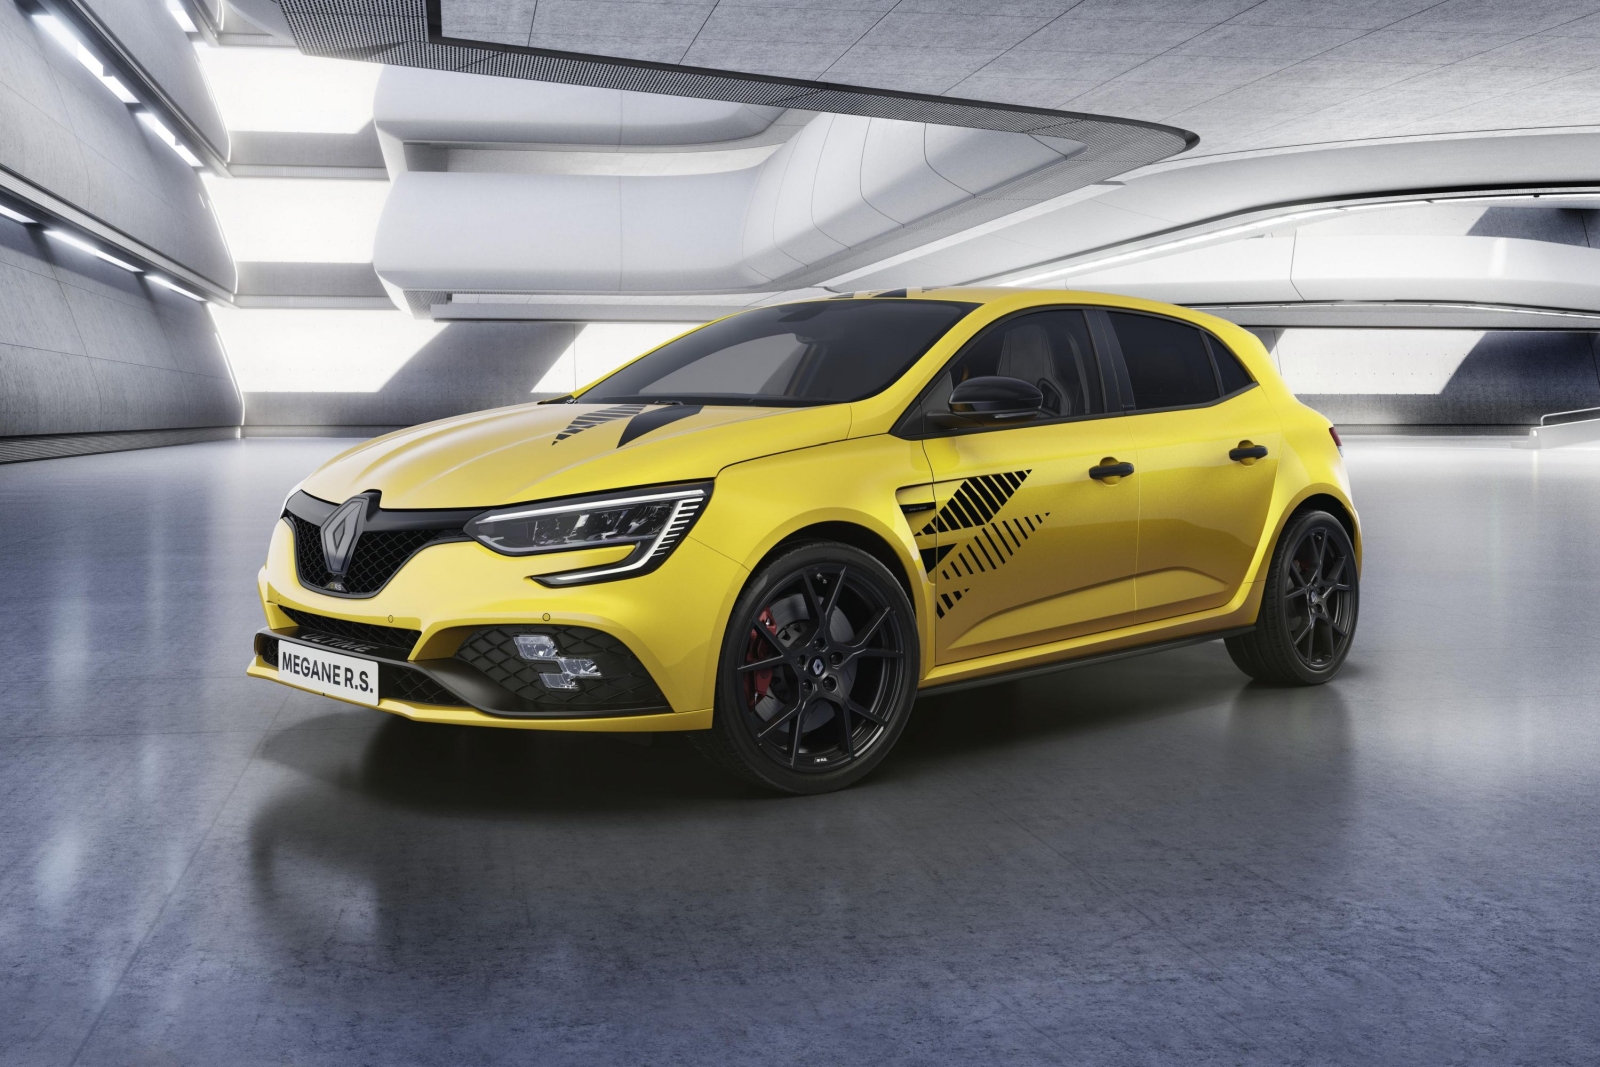 2023 Renault Megane R.S. Ultime Auto MY23